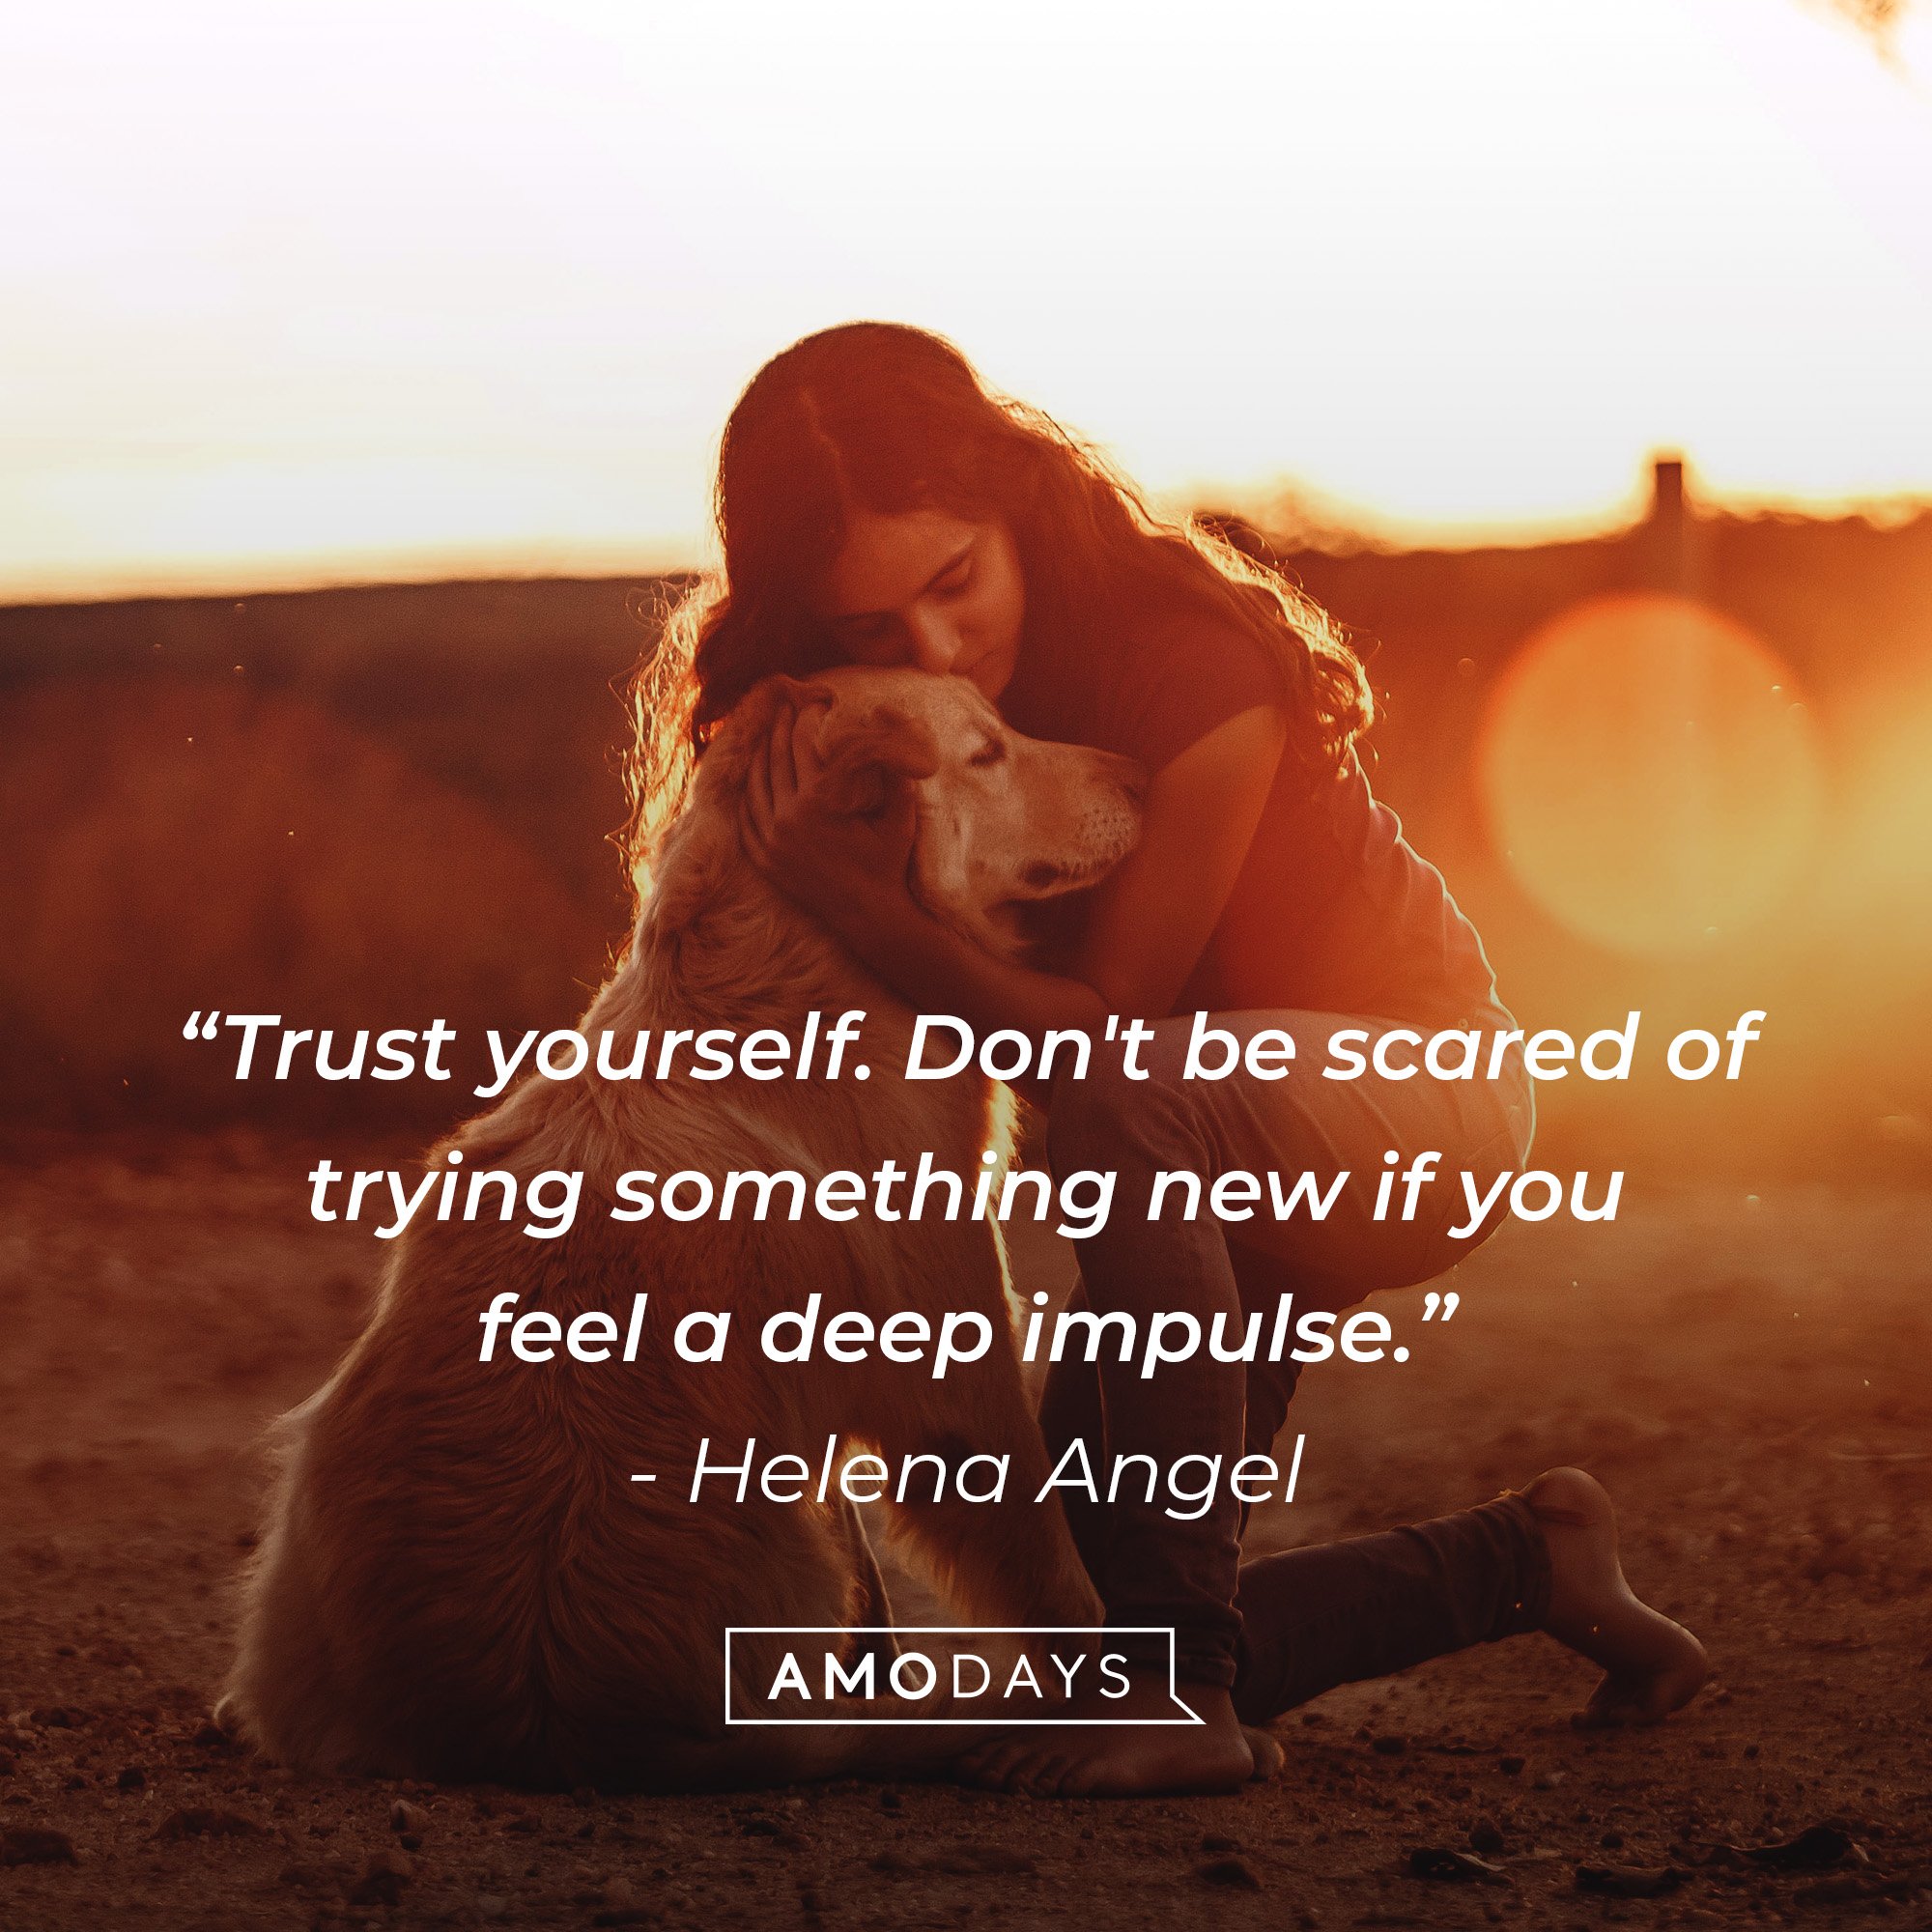 Helena Angel’s quote: “Trust yourself. Don't be scared of trying something new if you feel a deep impulse.” | Image: AmoDays